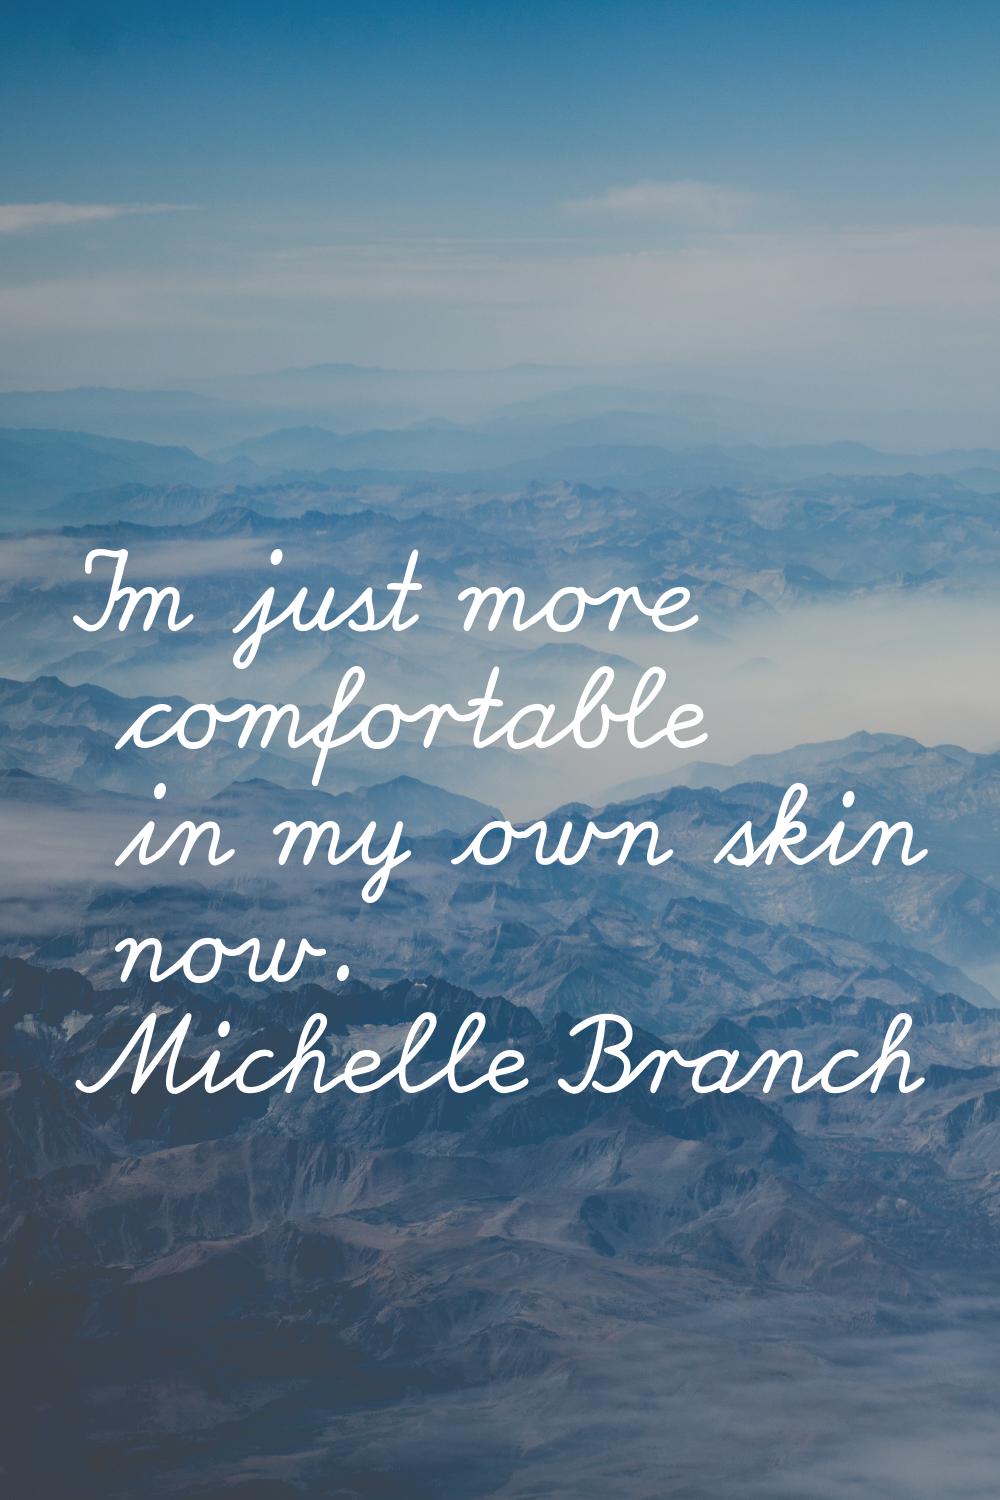 I'm just more comfortable in my own skin now.